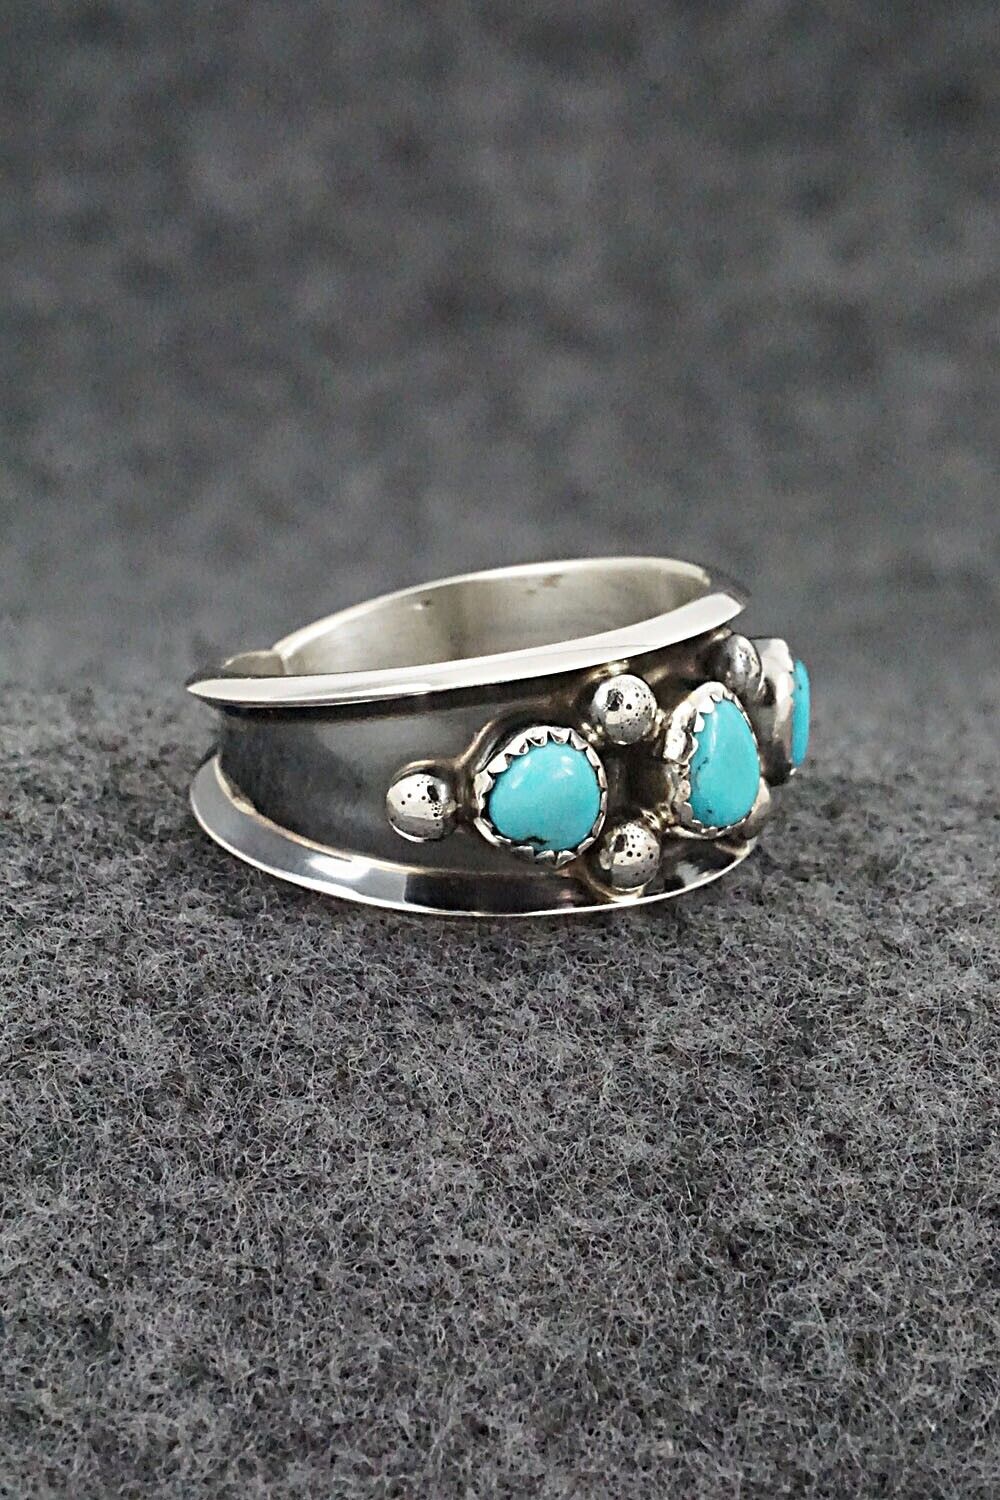 Turquoise & Sterling Silver Ring - Paul Largo - Size 9.25